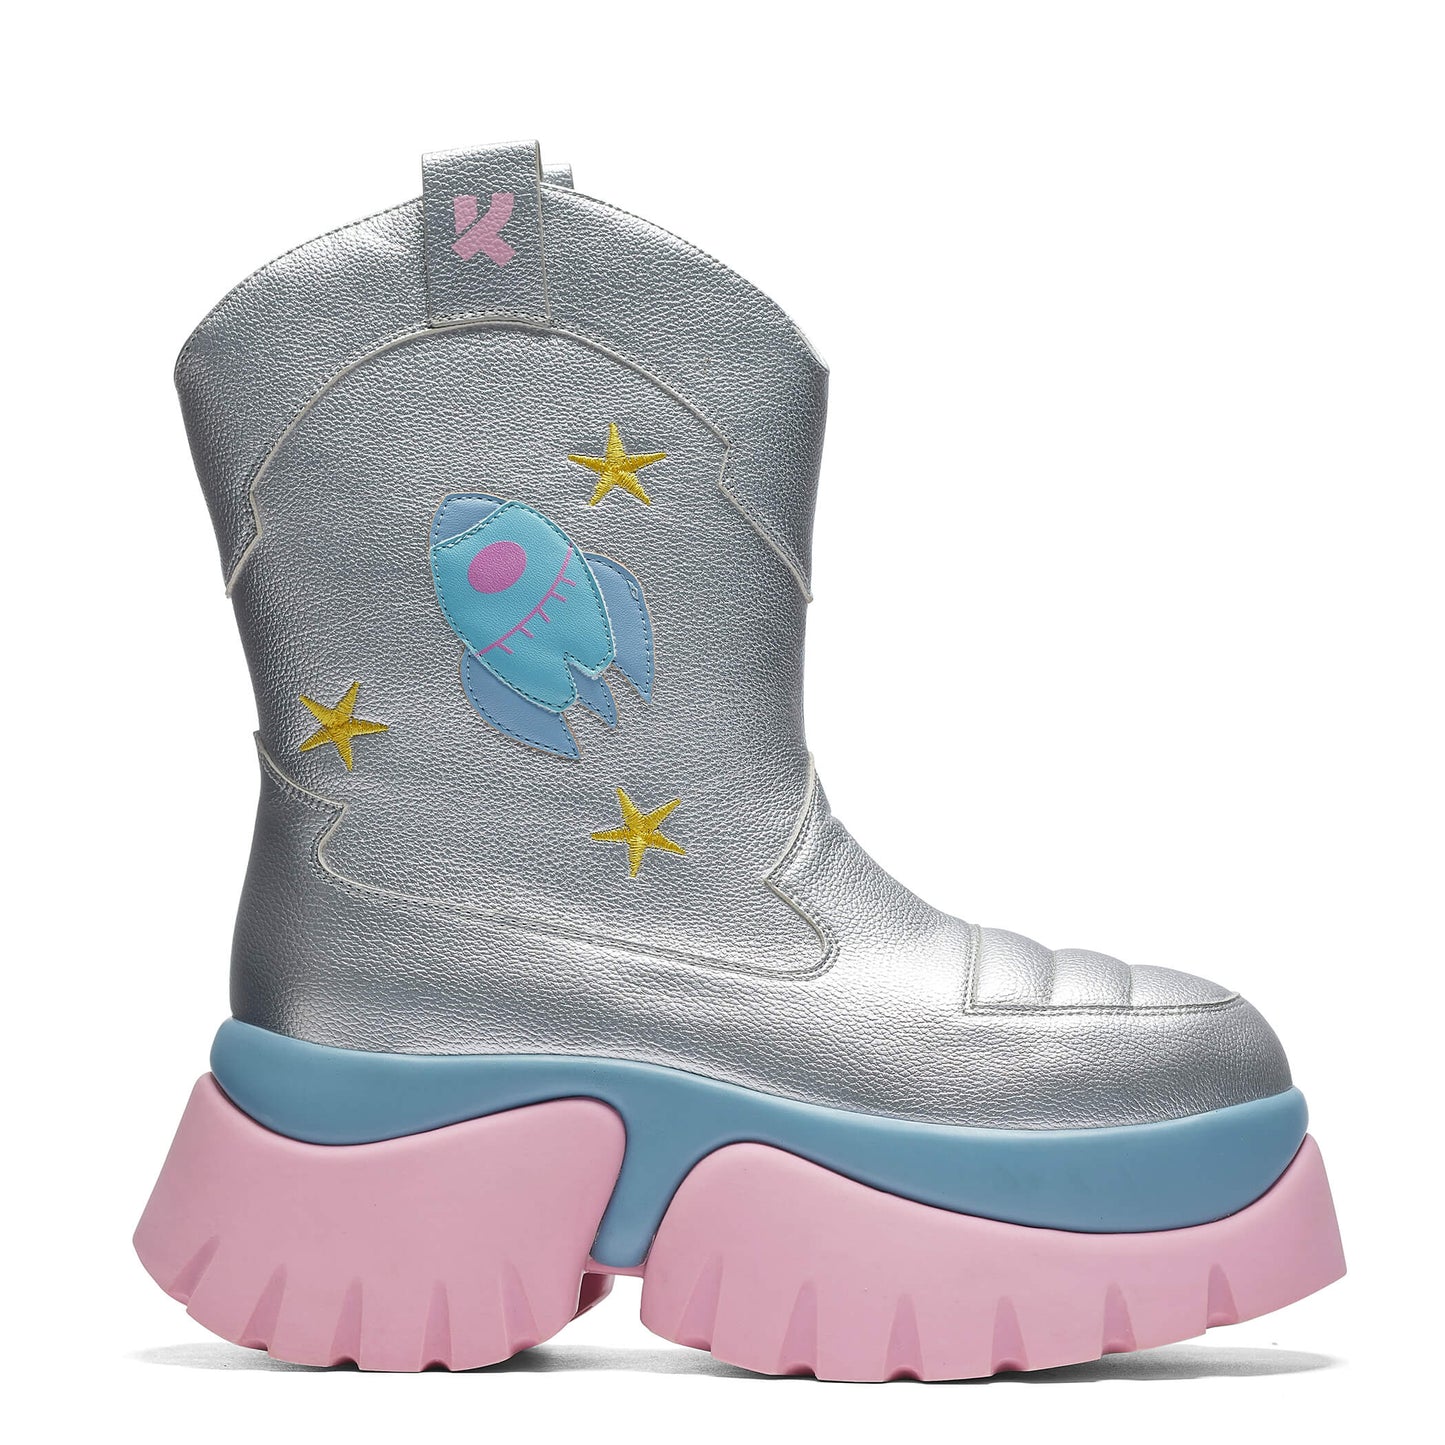 A Fairytale Galaxy Space Boots - Silver - Ankle Boots - KOI Footwear - Silver - Side View